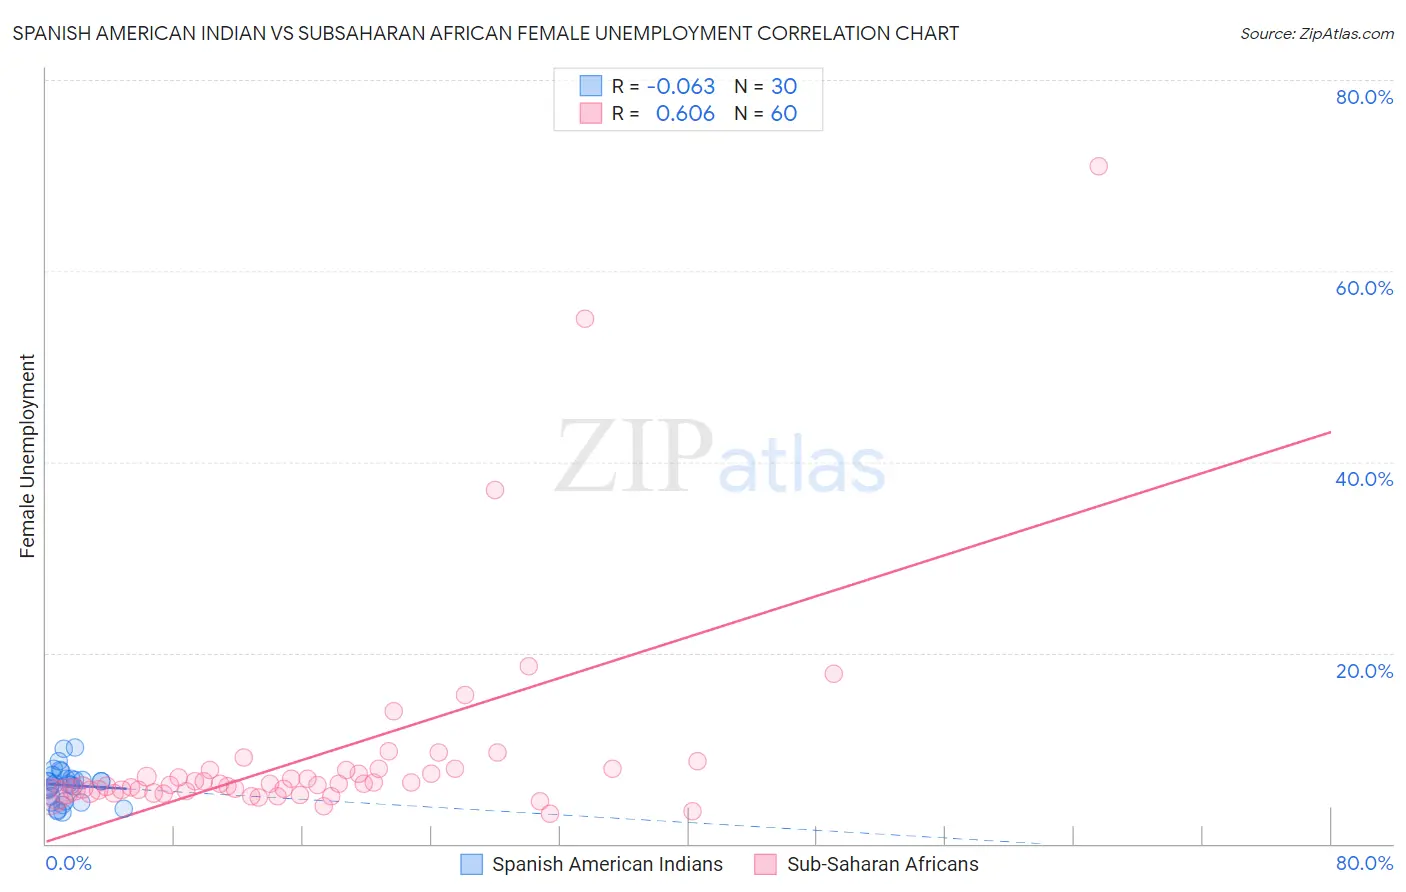 Spanish American Indian vs Subsaharan African Female Unemployment